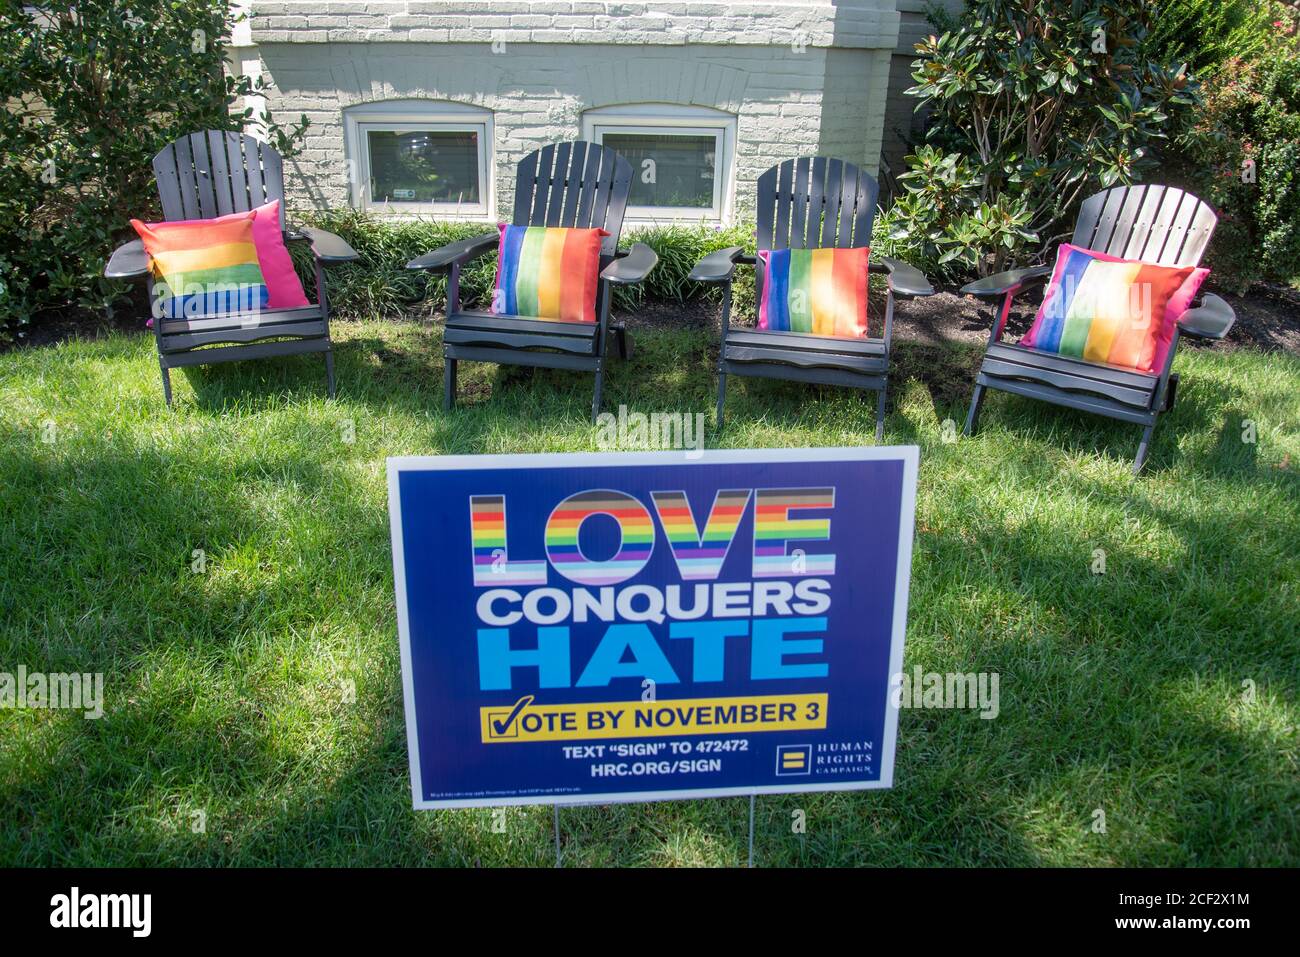 Rainbow colored seat cushions decorate lawn furniture in front of a sign reading 'Love Conquers Hate, Vote by November 3,' in the Shaw neighborhood of Stock Photo